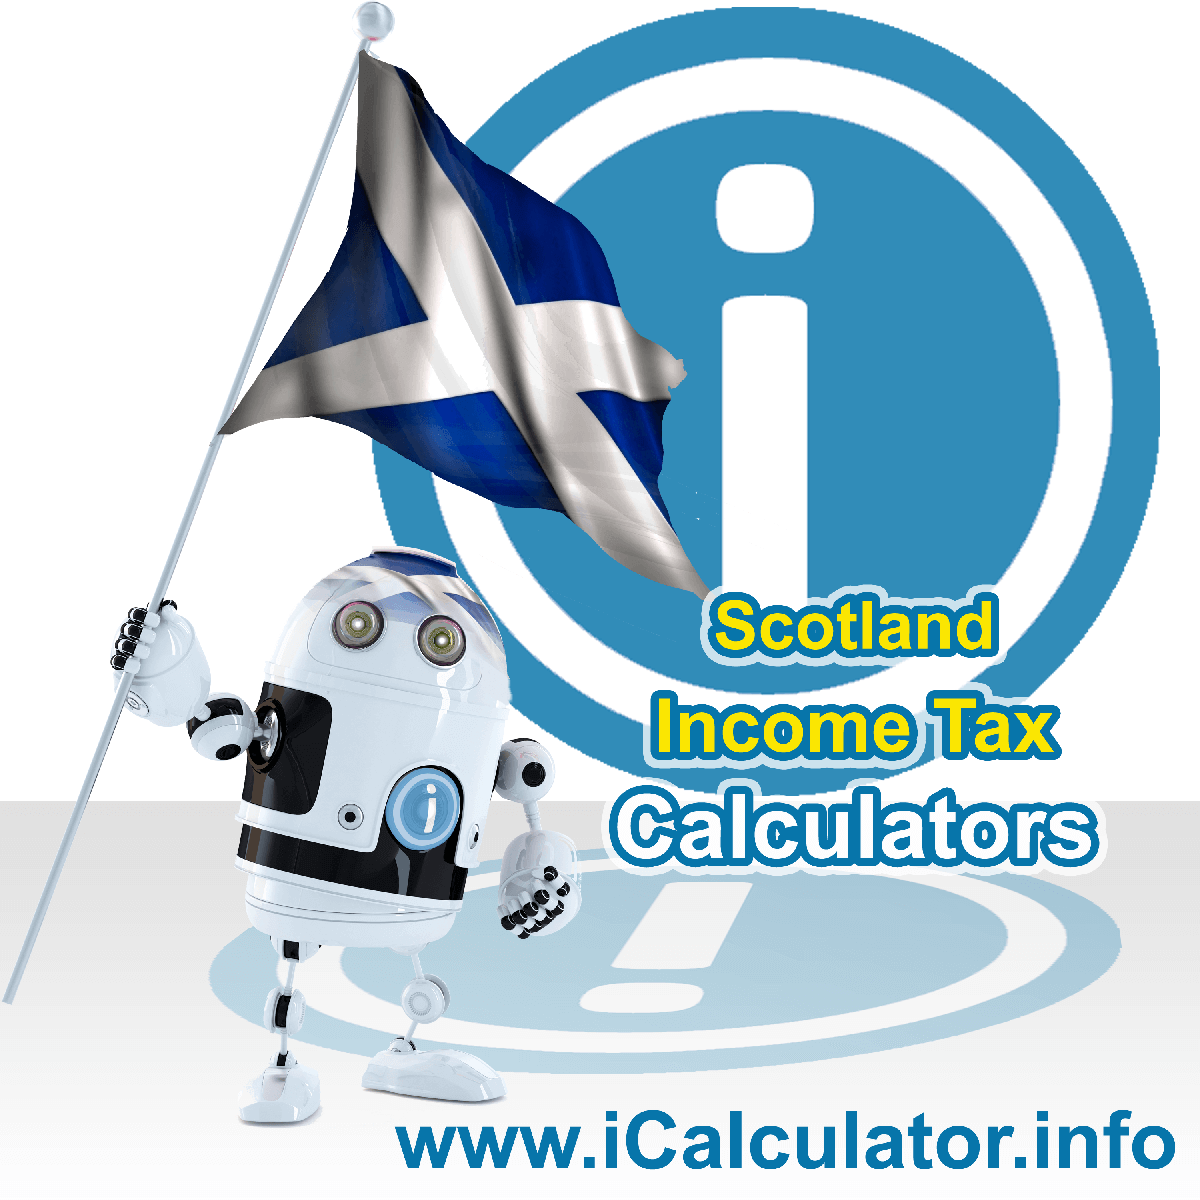 Scotland Income Tax Calculator. This image shows a new employer in Scotland calculating the annual payroll costs based on multiple payroll payments in one year in Scotland using the Scotland income tax calculator to understand their payroll costs in Scotland in 2023